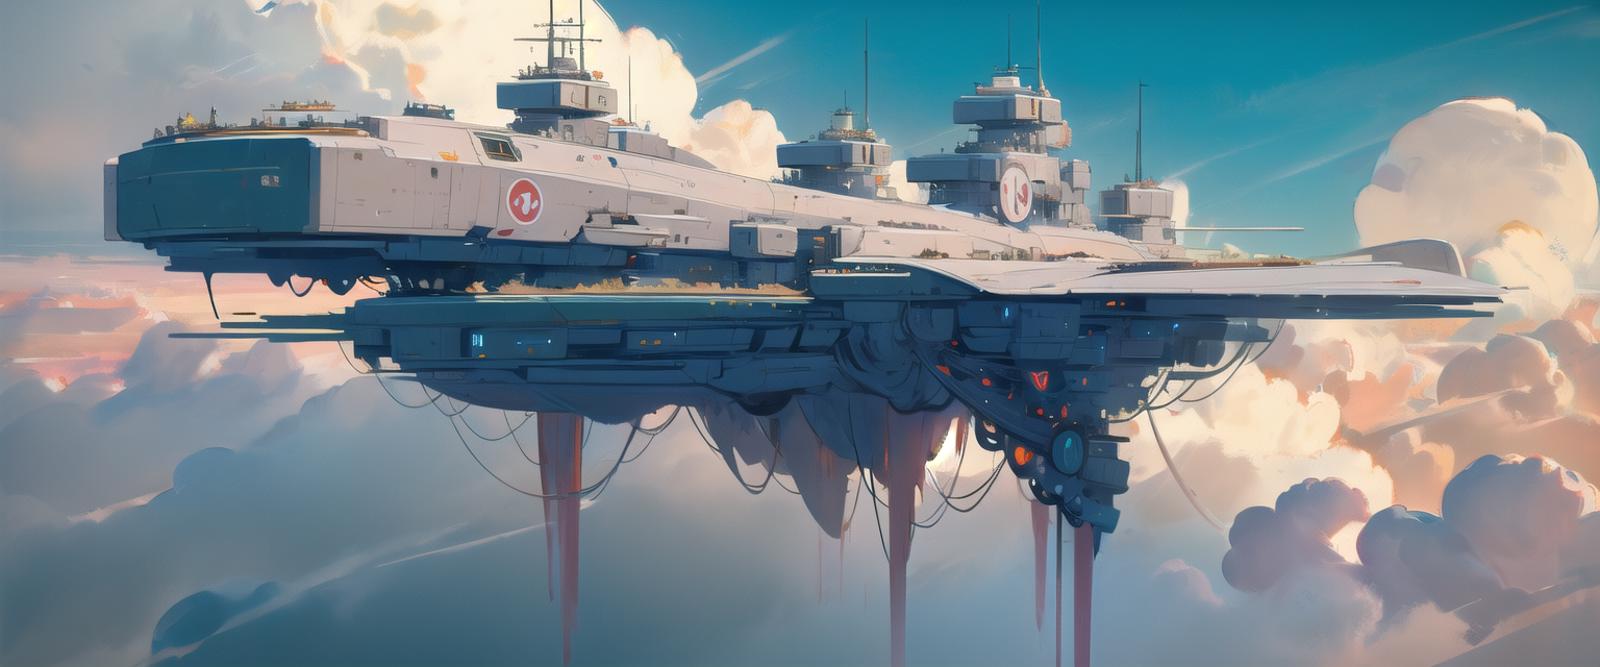 [LoRA] Flying Warship / 装甲空母 Concept (With dropout & noise version) image by L_A_X